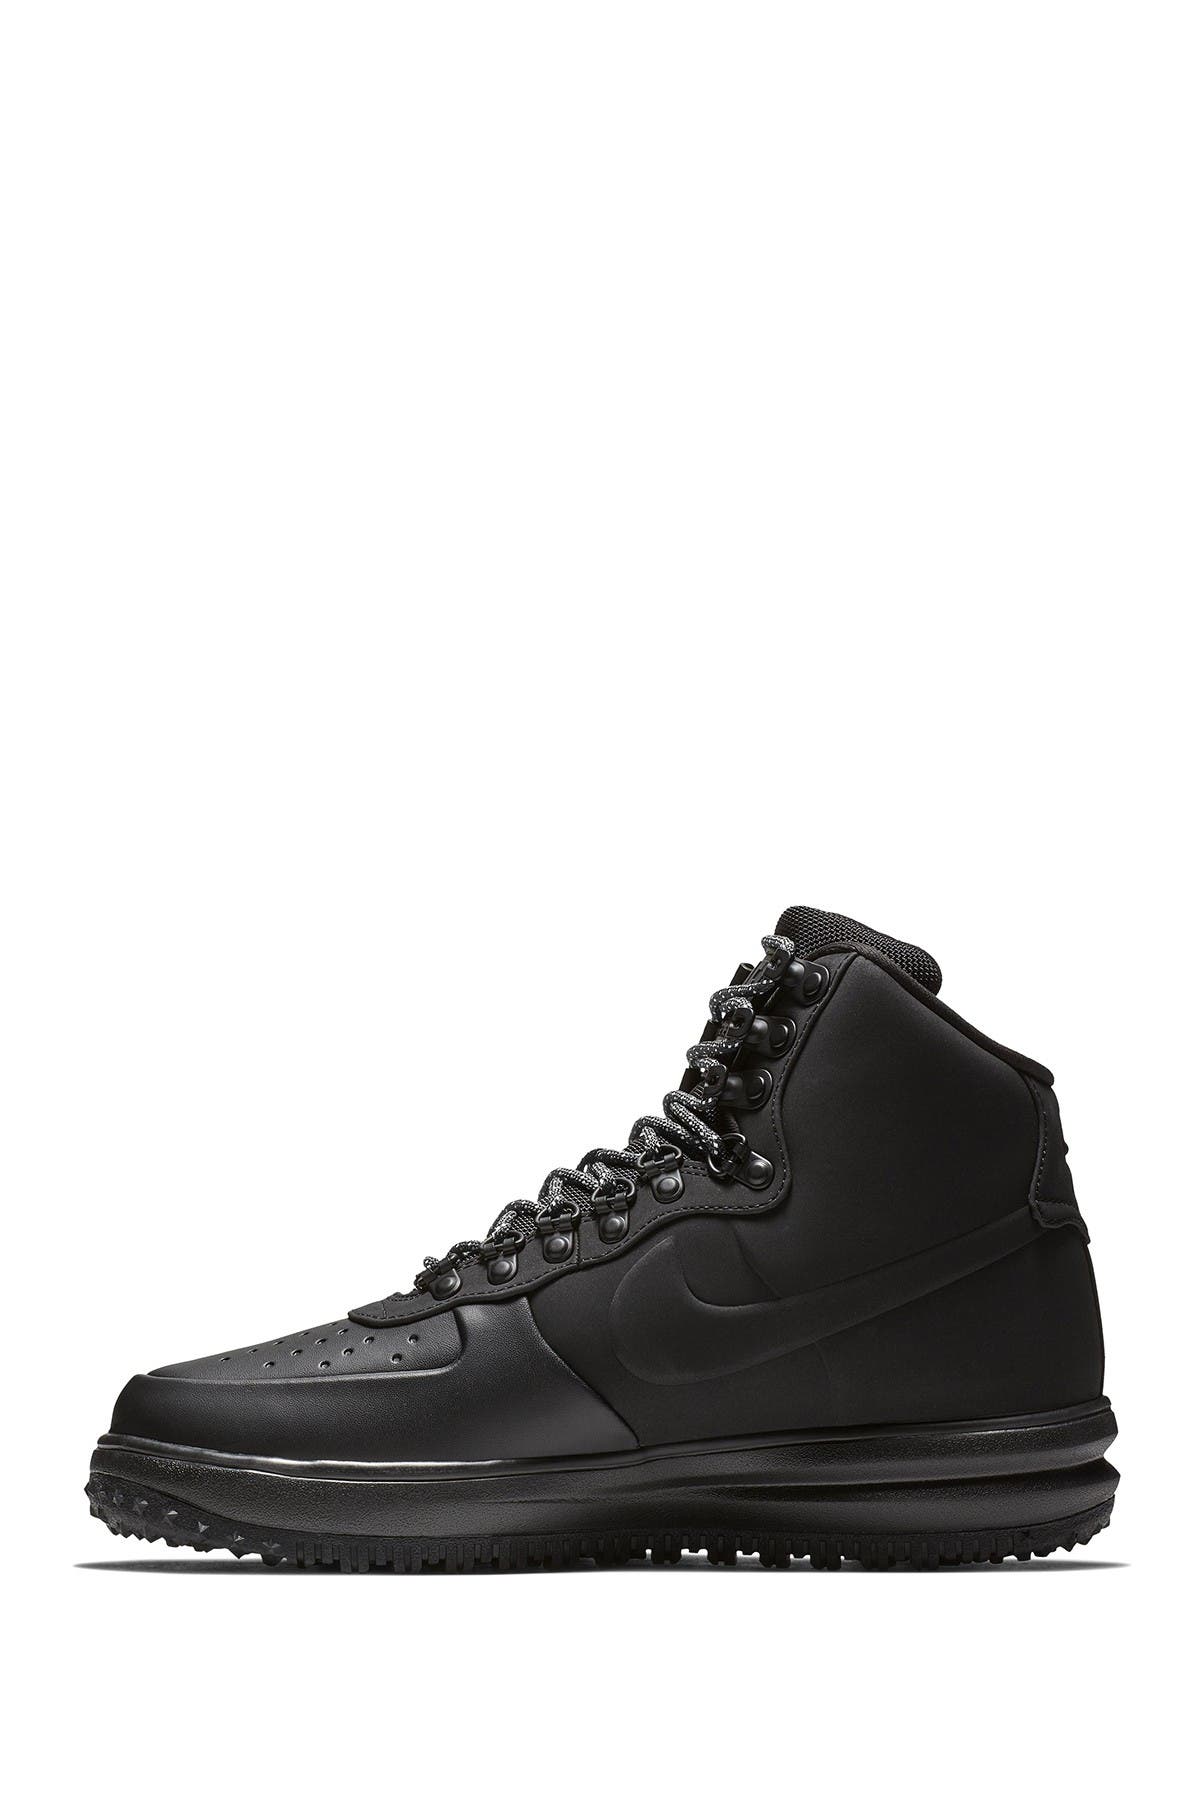 nike duck boots 18